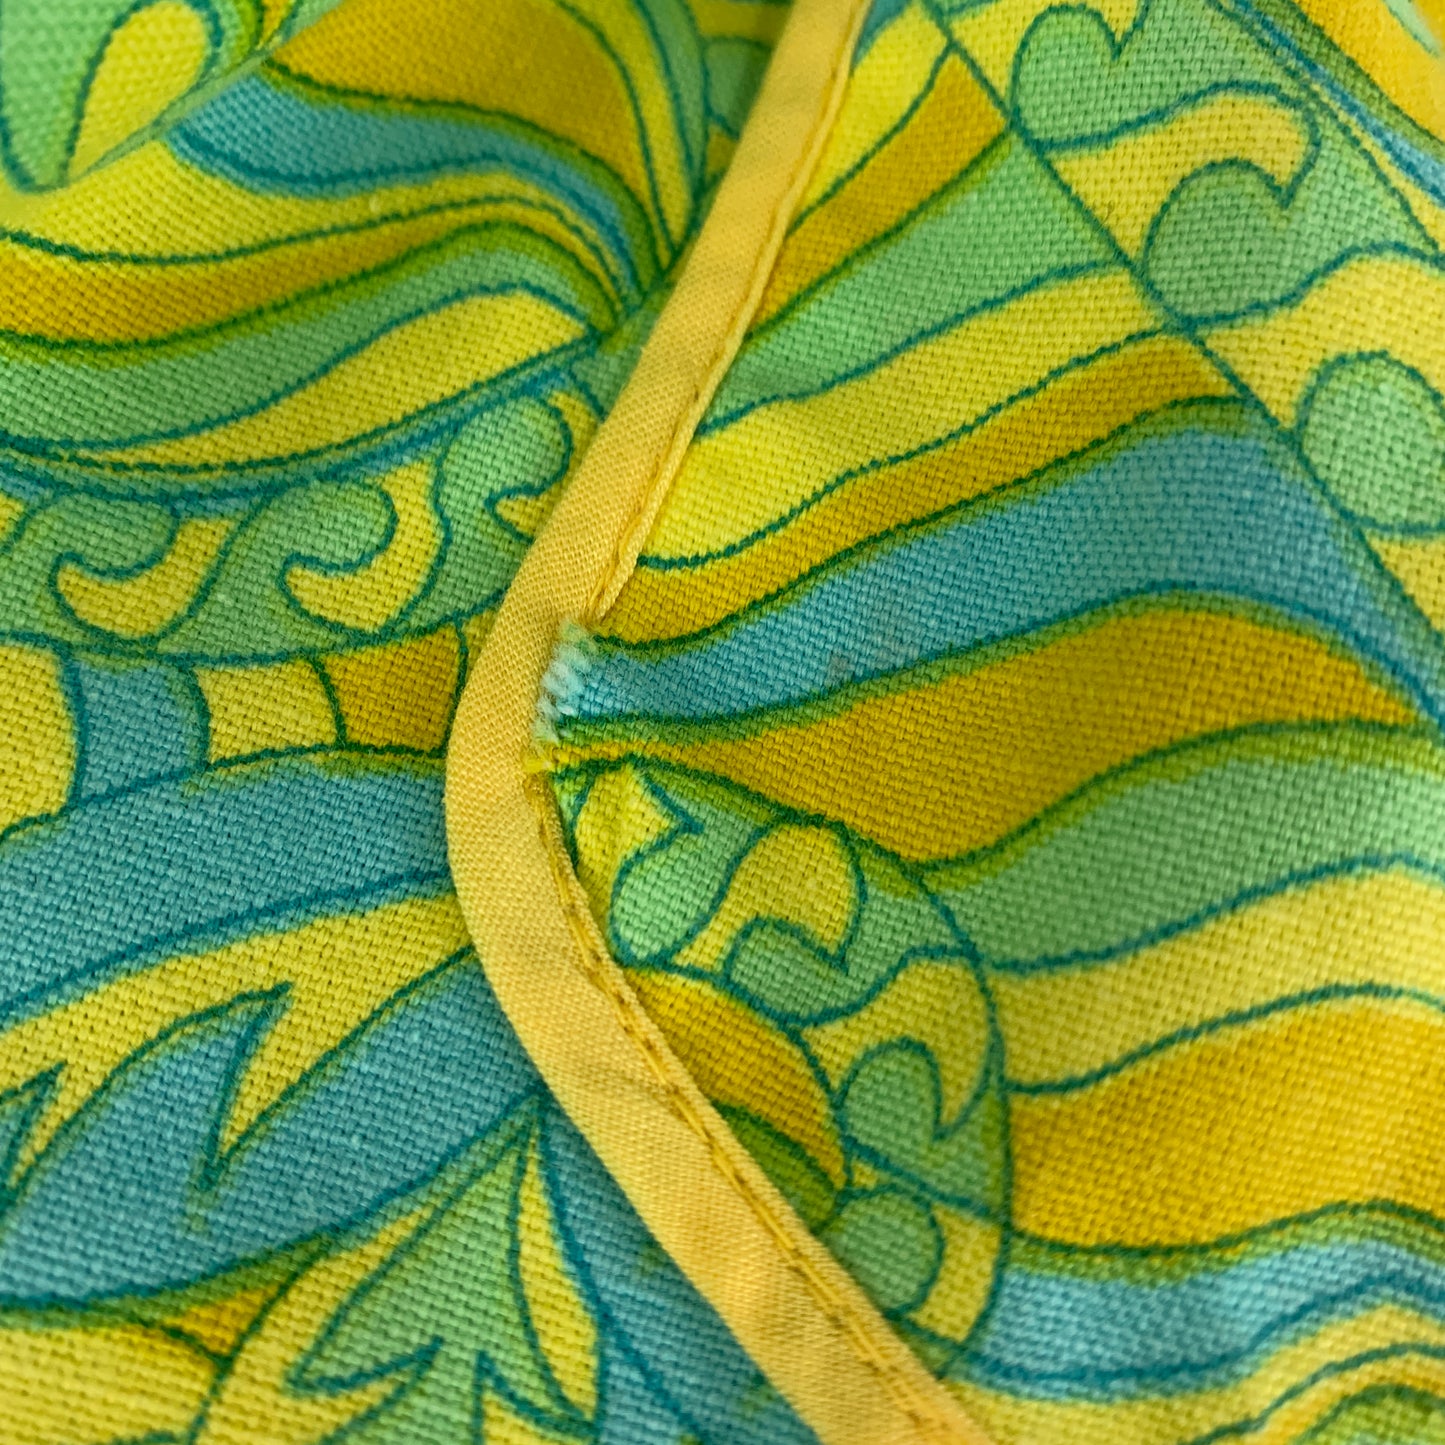 Vintage Apron Yellow, Blue, and Green Psychedelic Pattern Half Apron